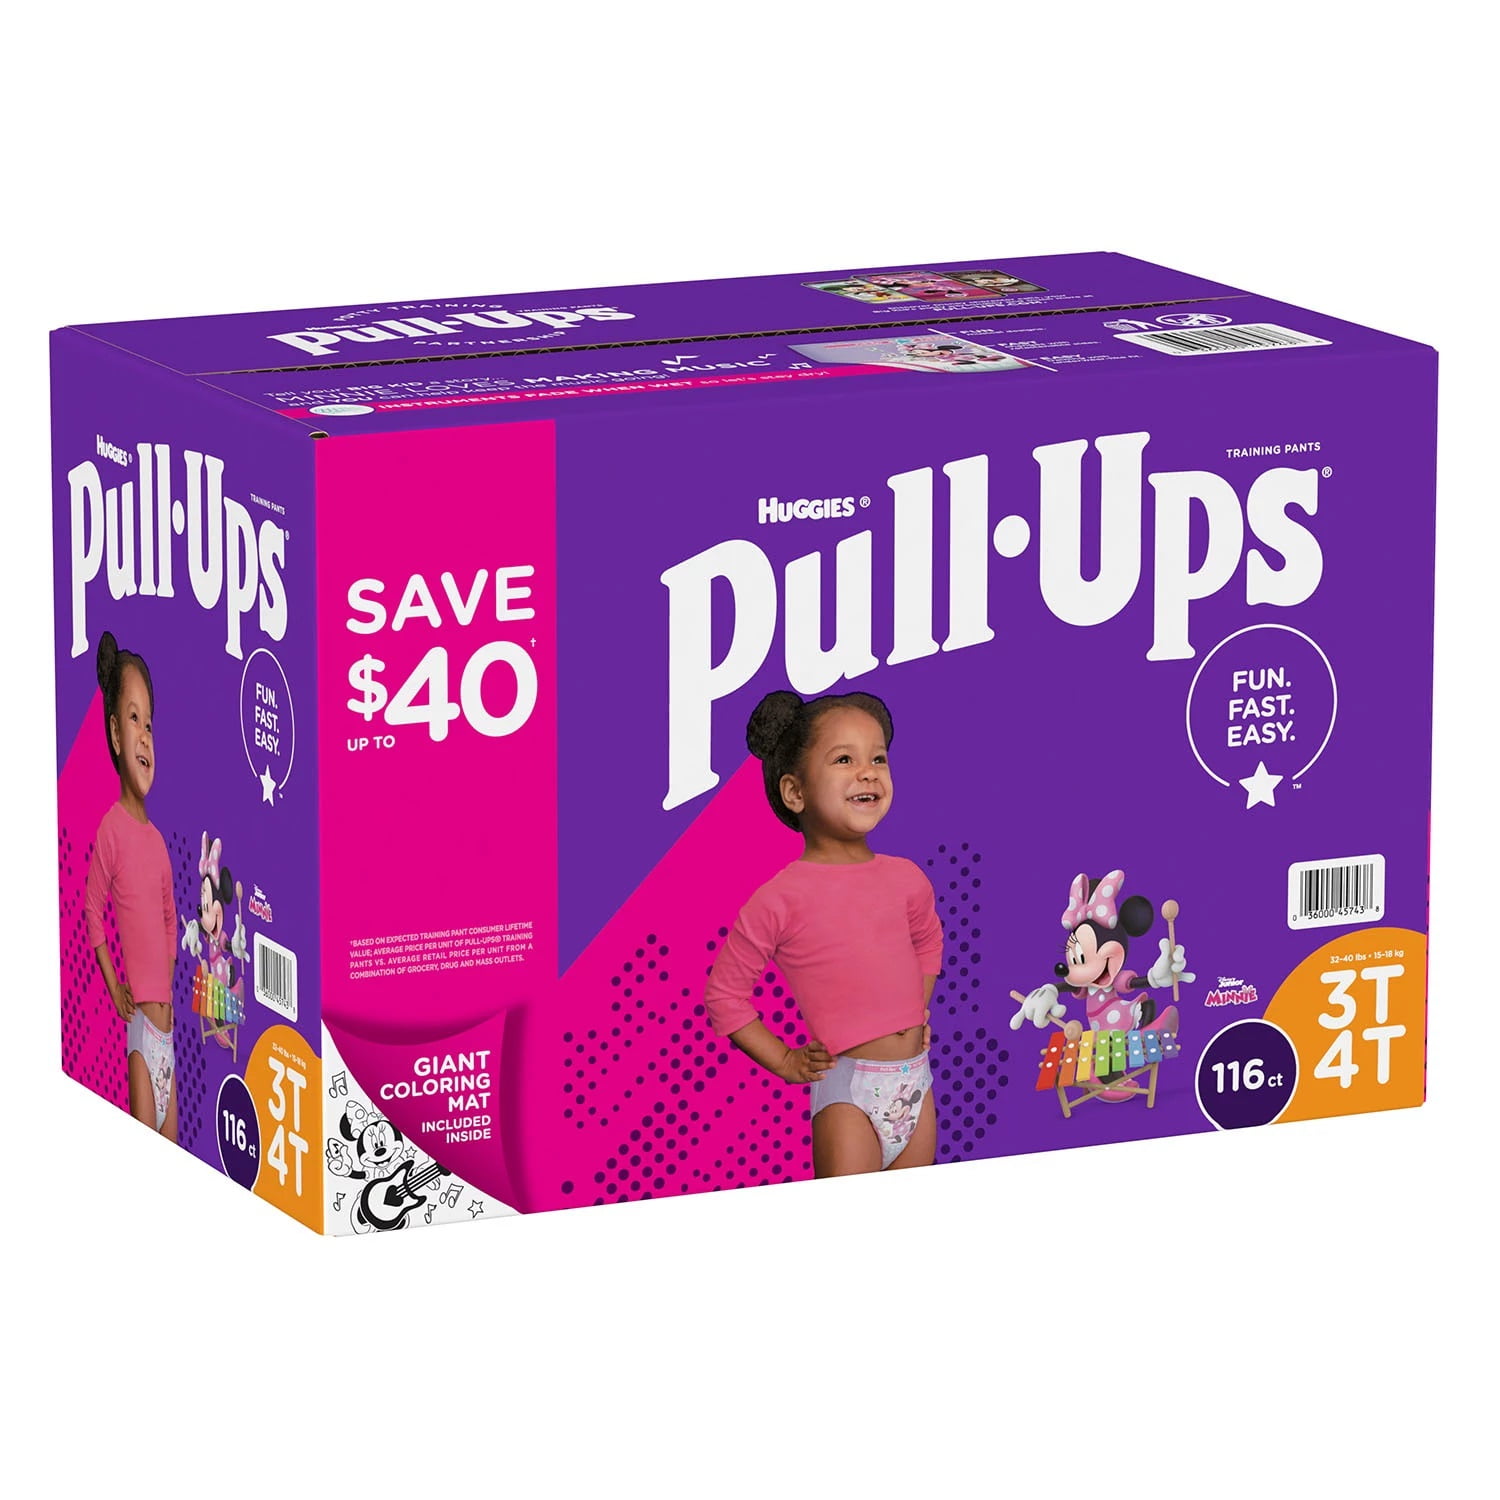 Huggies Pull-Ups Day Time Boy Training Pants Size 6 (15-23 Kg) –